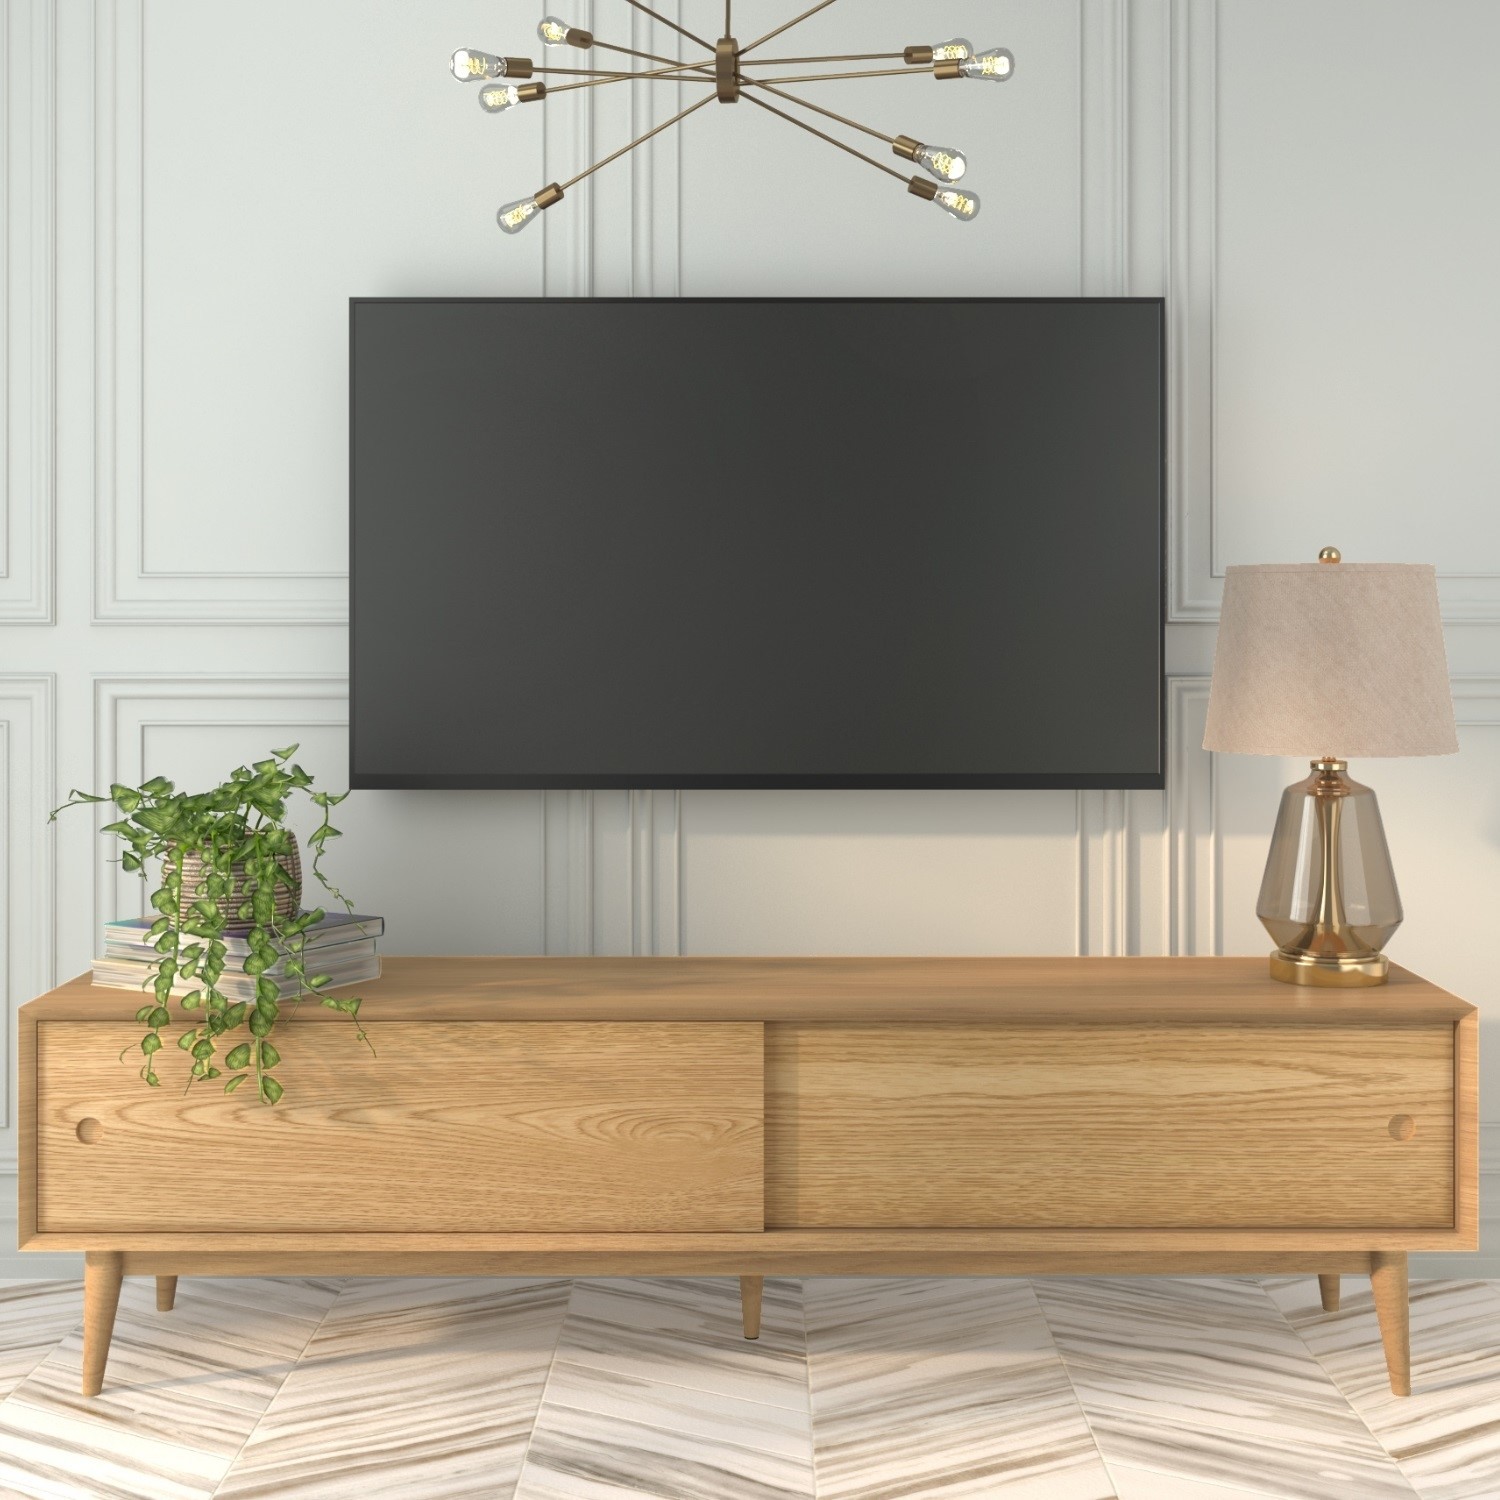 Solid Oak TV Unit with Sliding Doors - TV's up to 70 - Scandi - Briana